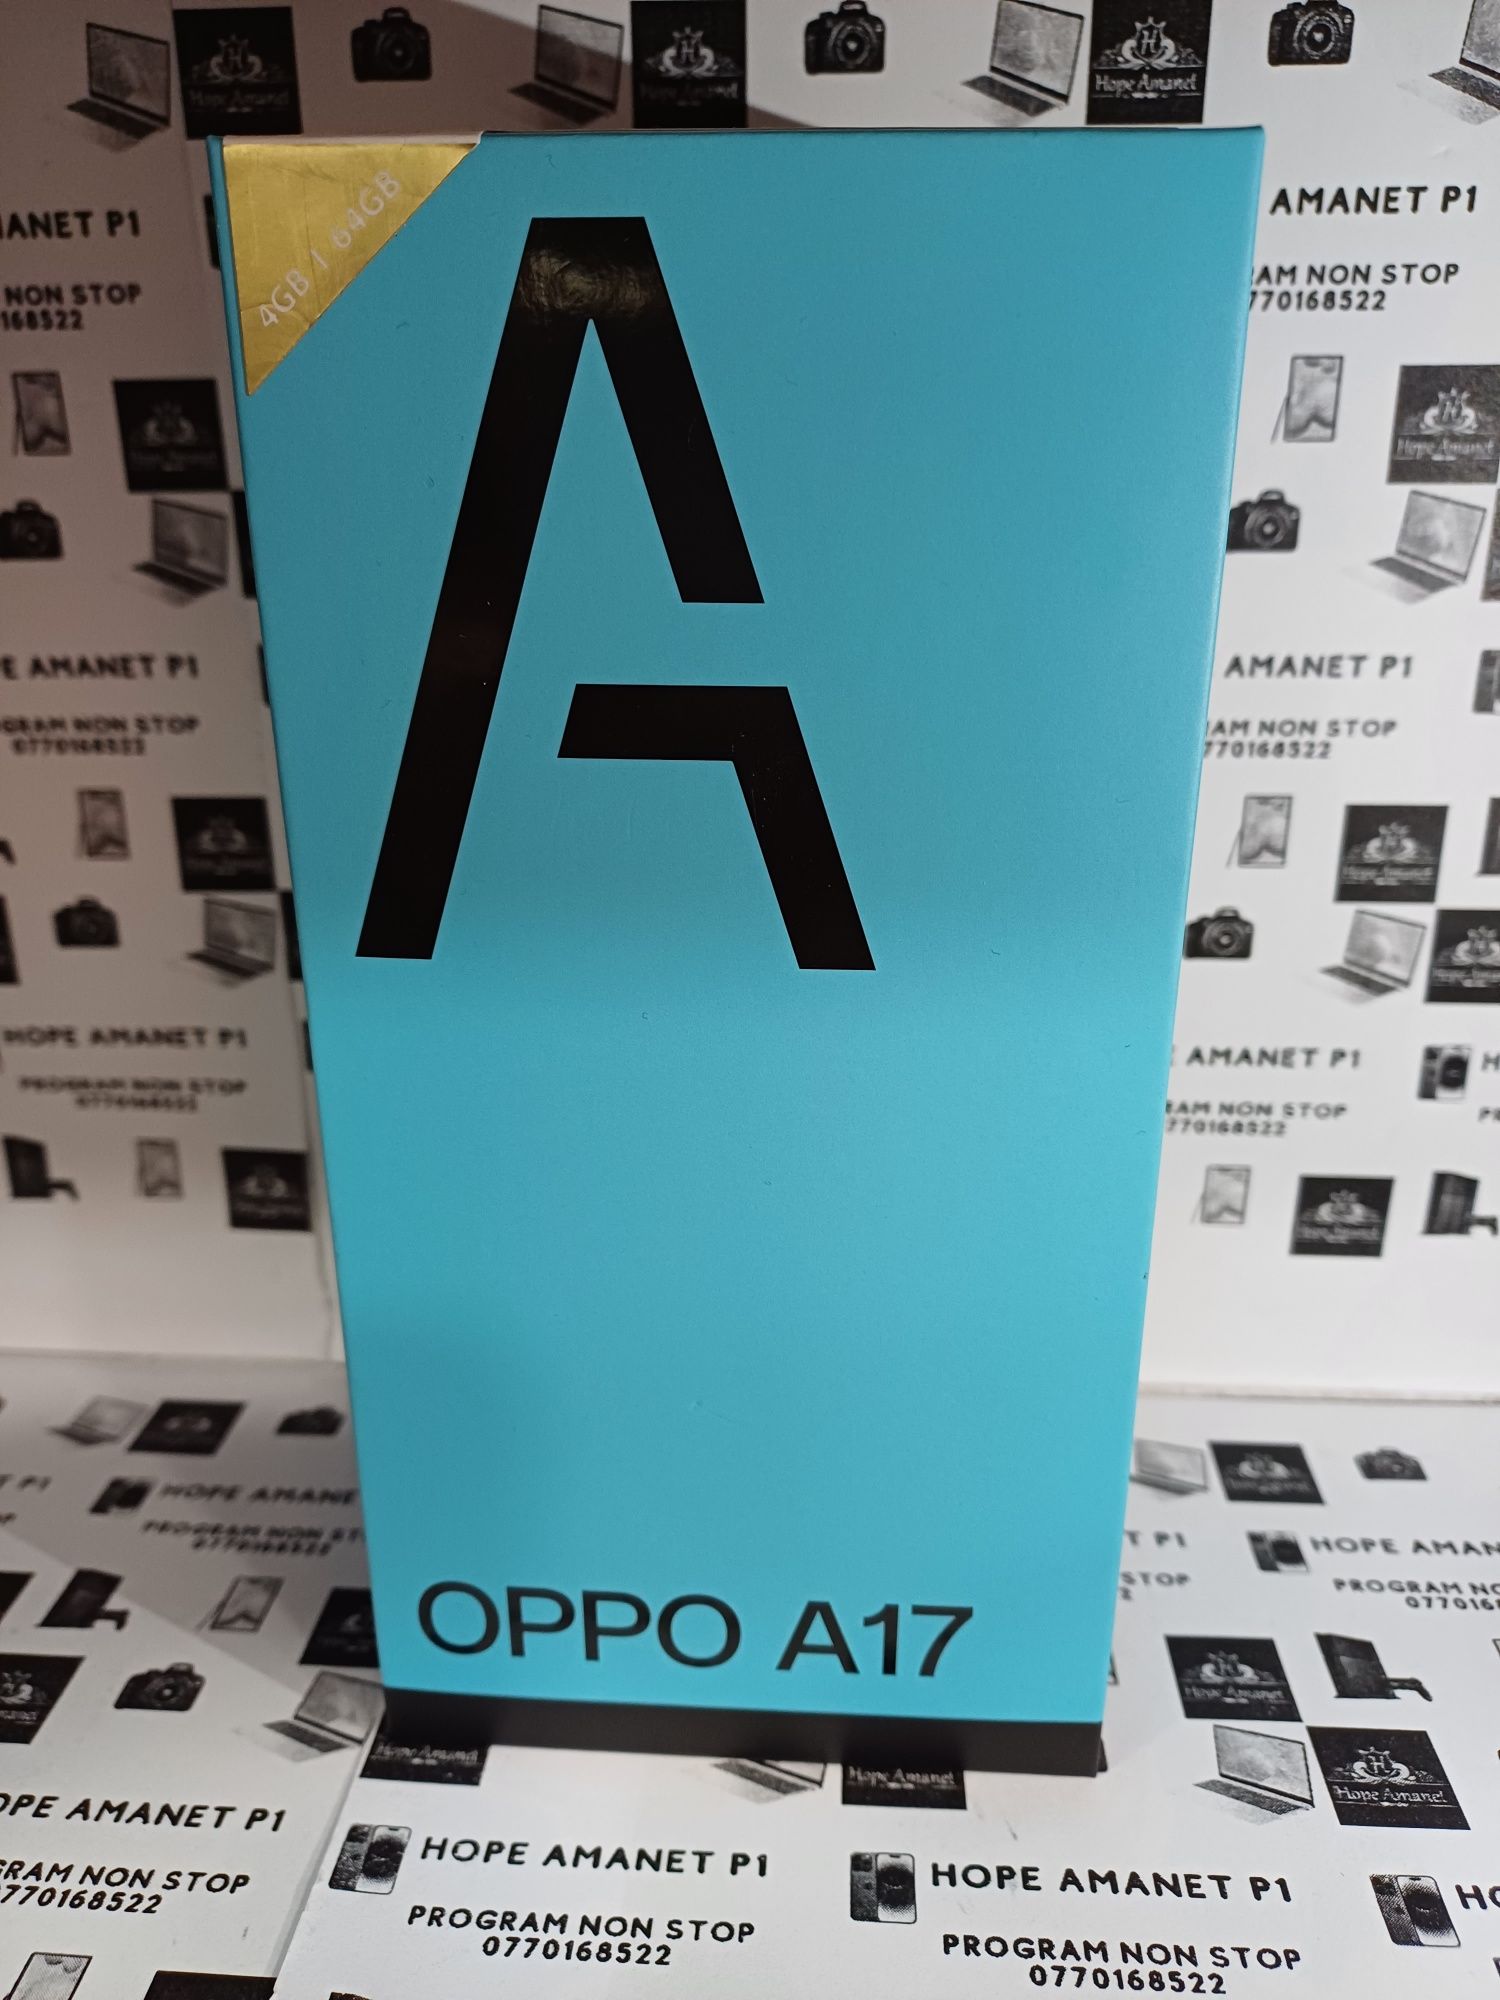 Hope Amanet P1/OPPO A17